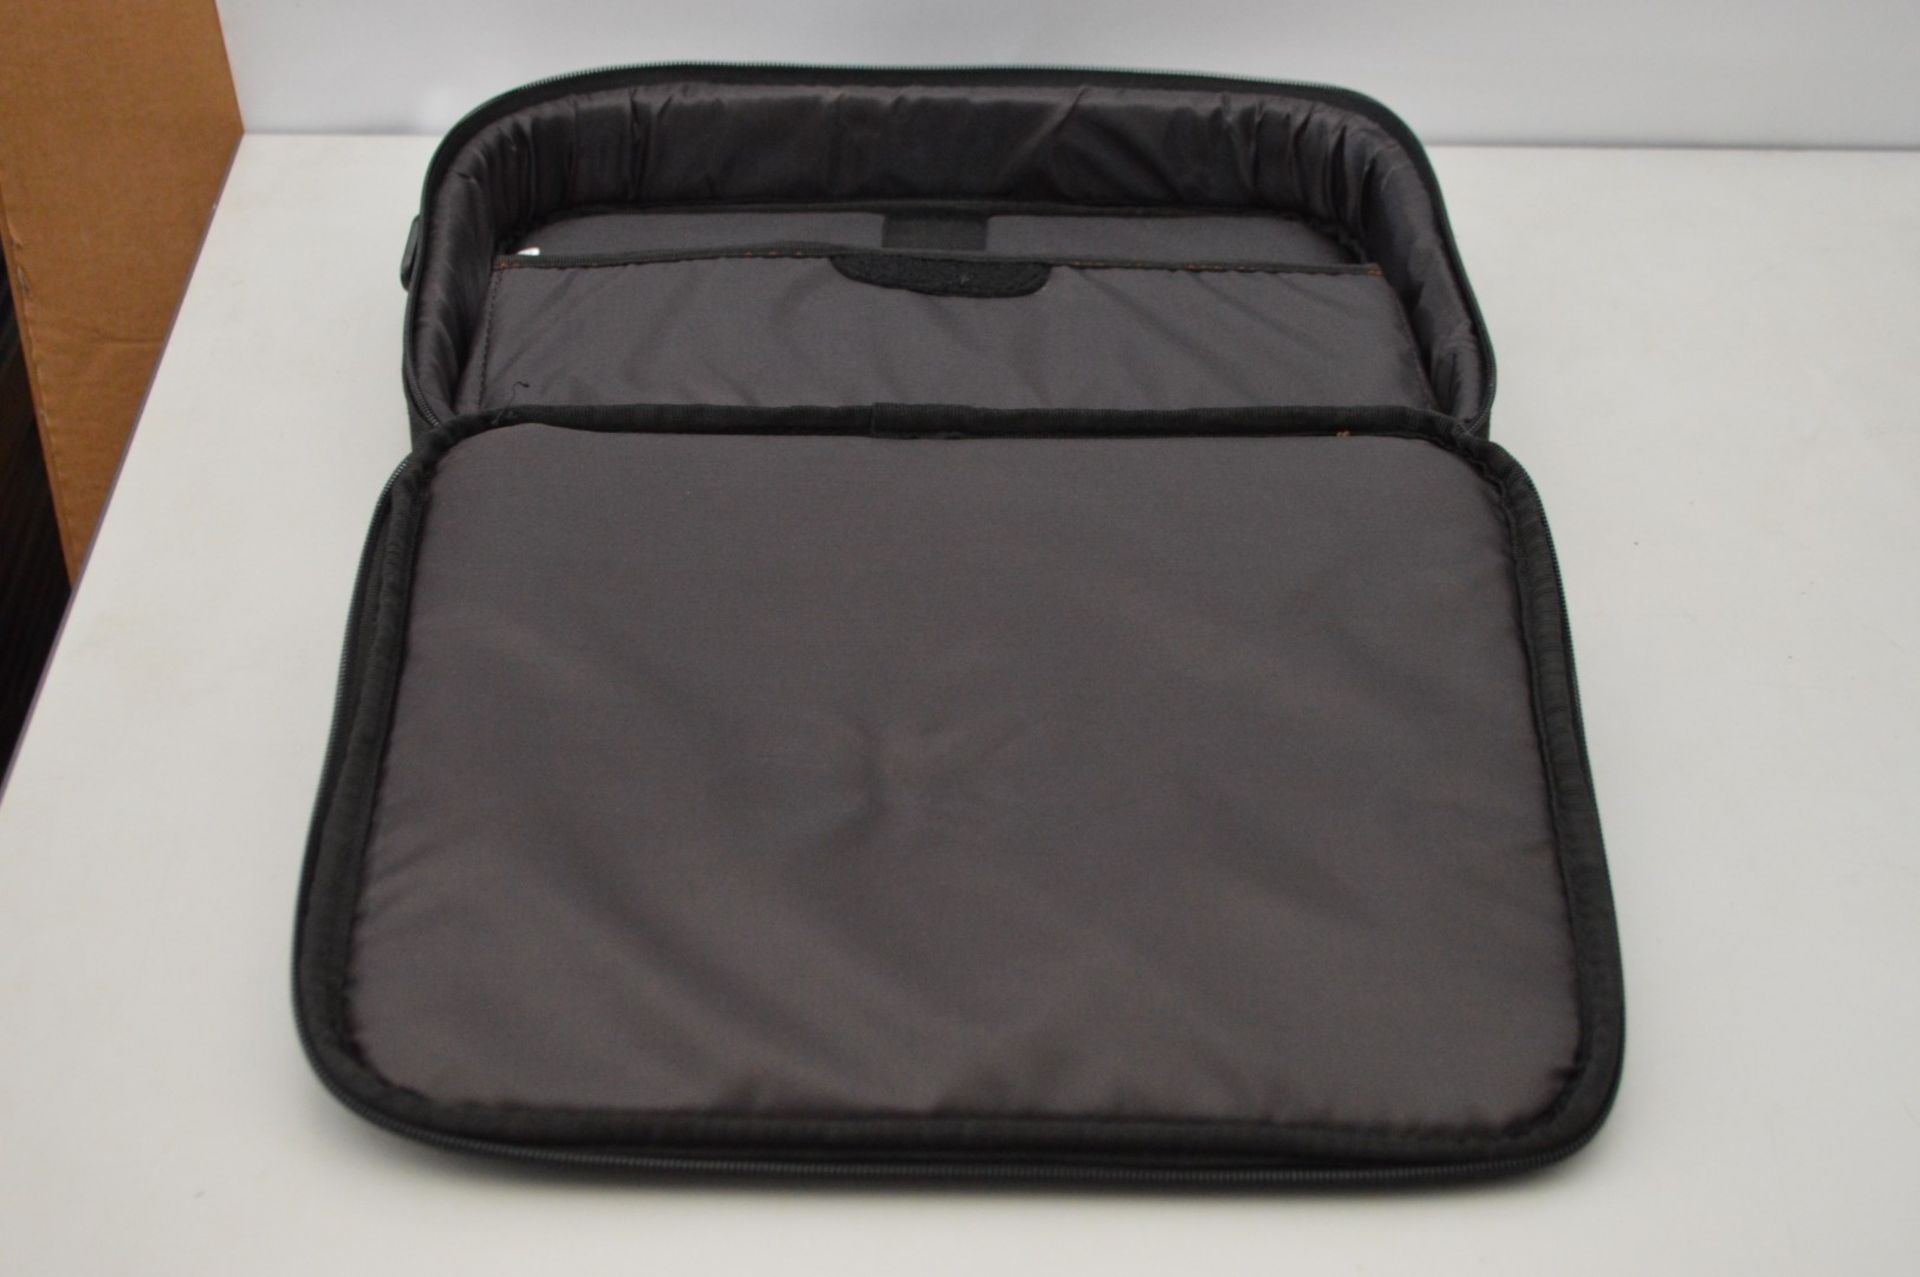 12 x Big Change Tablet Bags 16inchs - Ref TP394 - Image 3 of 5